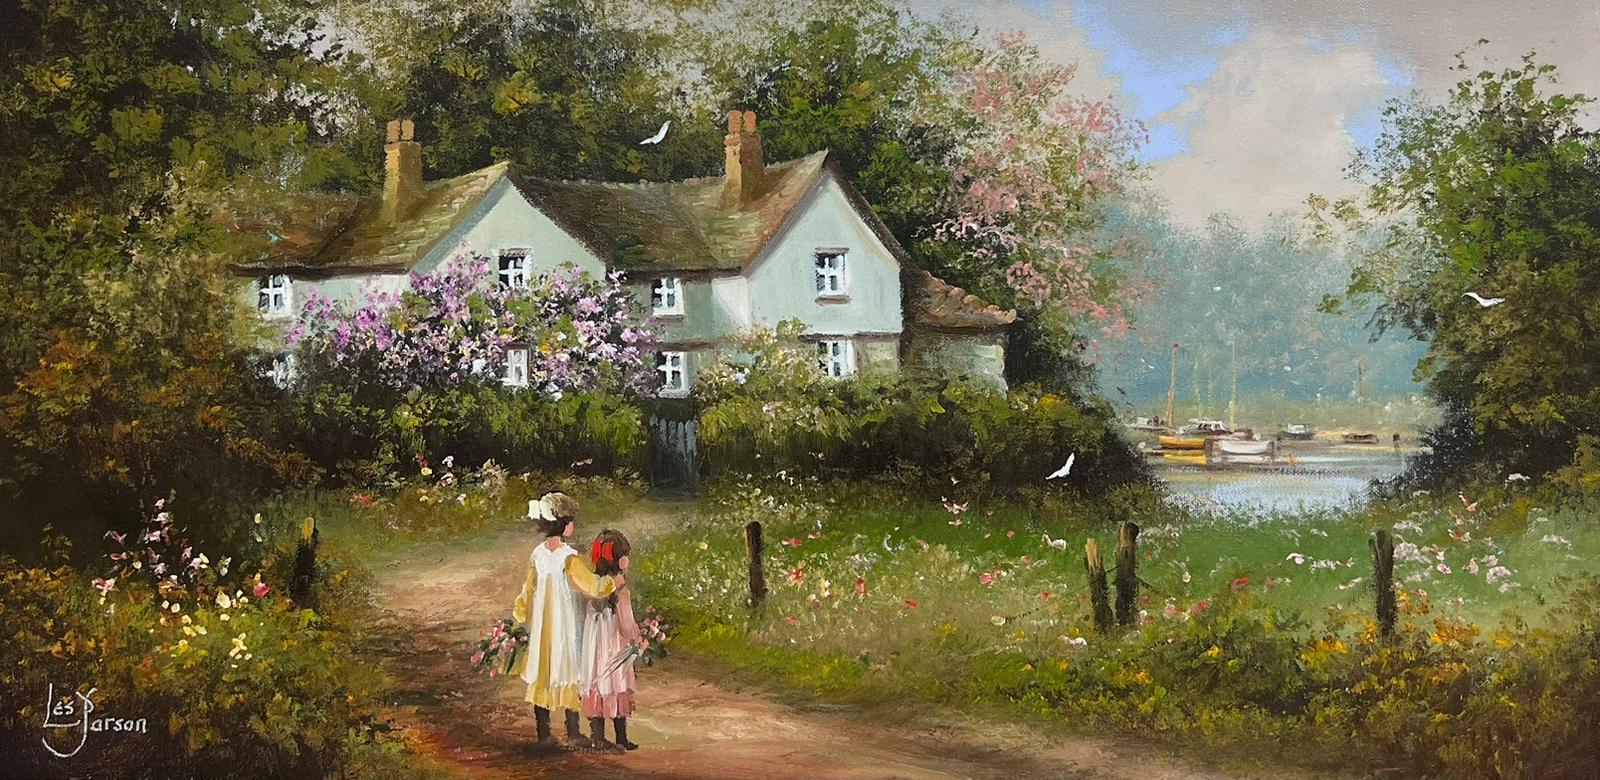 Les Parsons Landscape Painting - Traditional English Signed Oil Painting Children in Cottage Flower Garden 